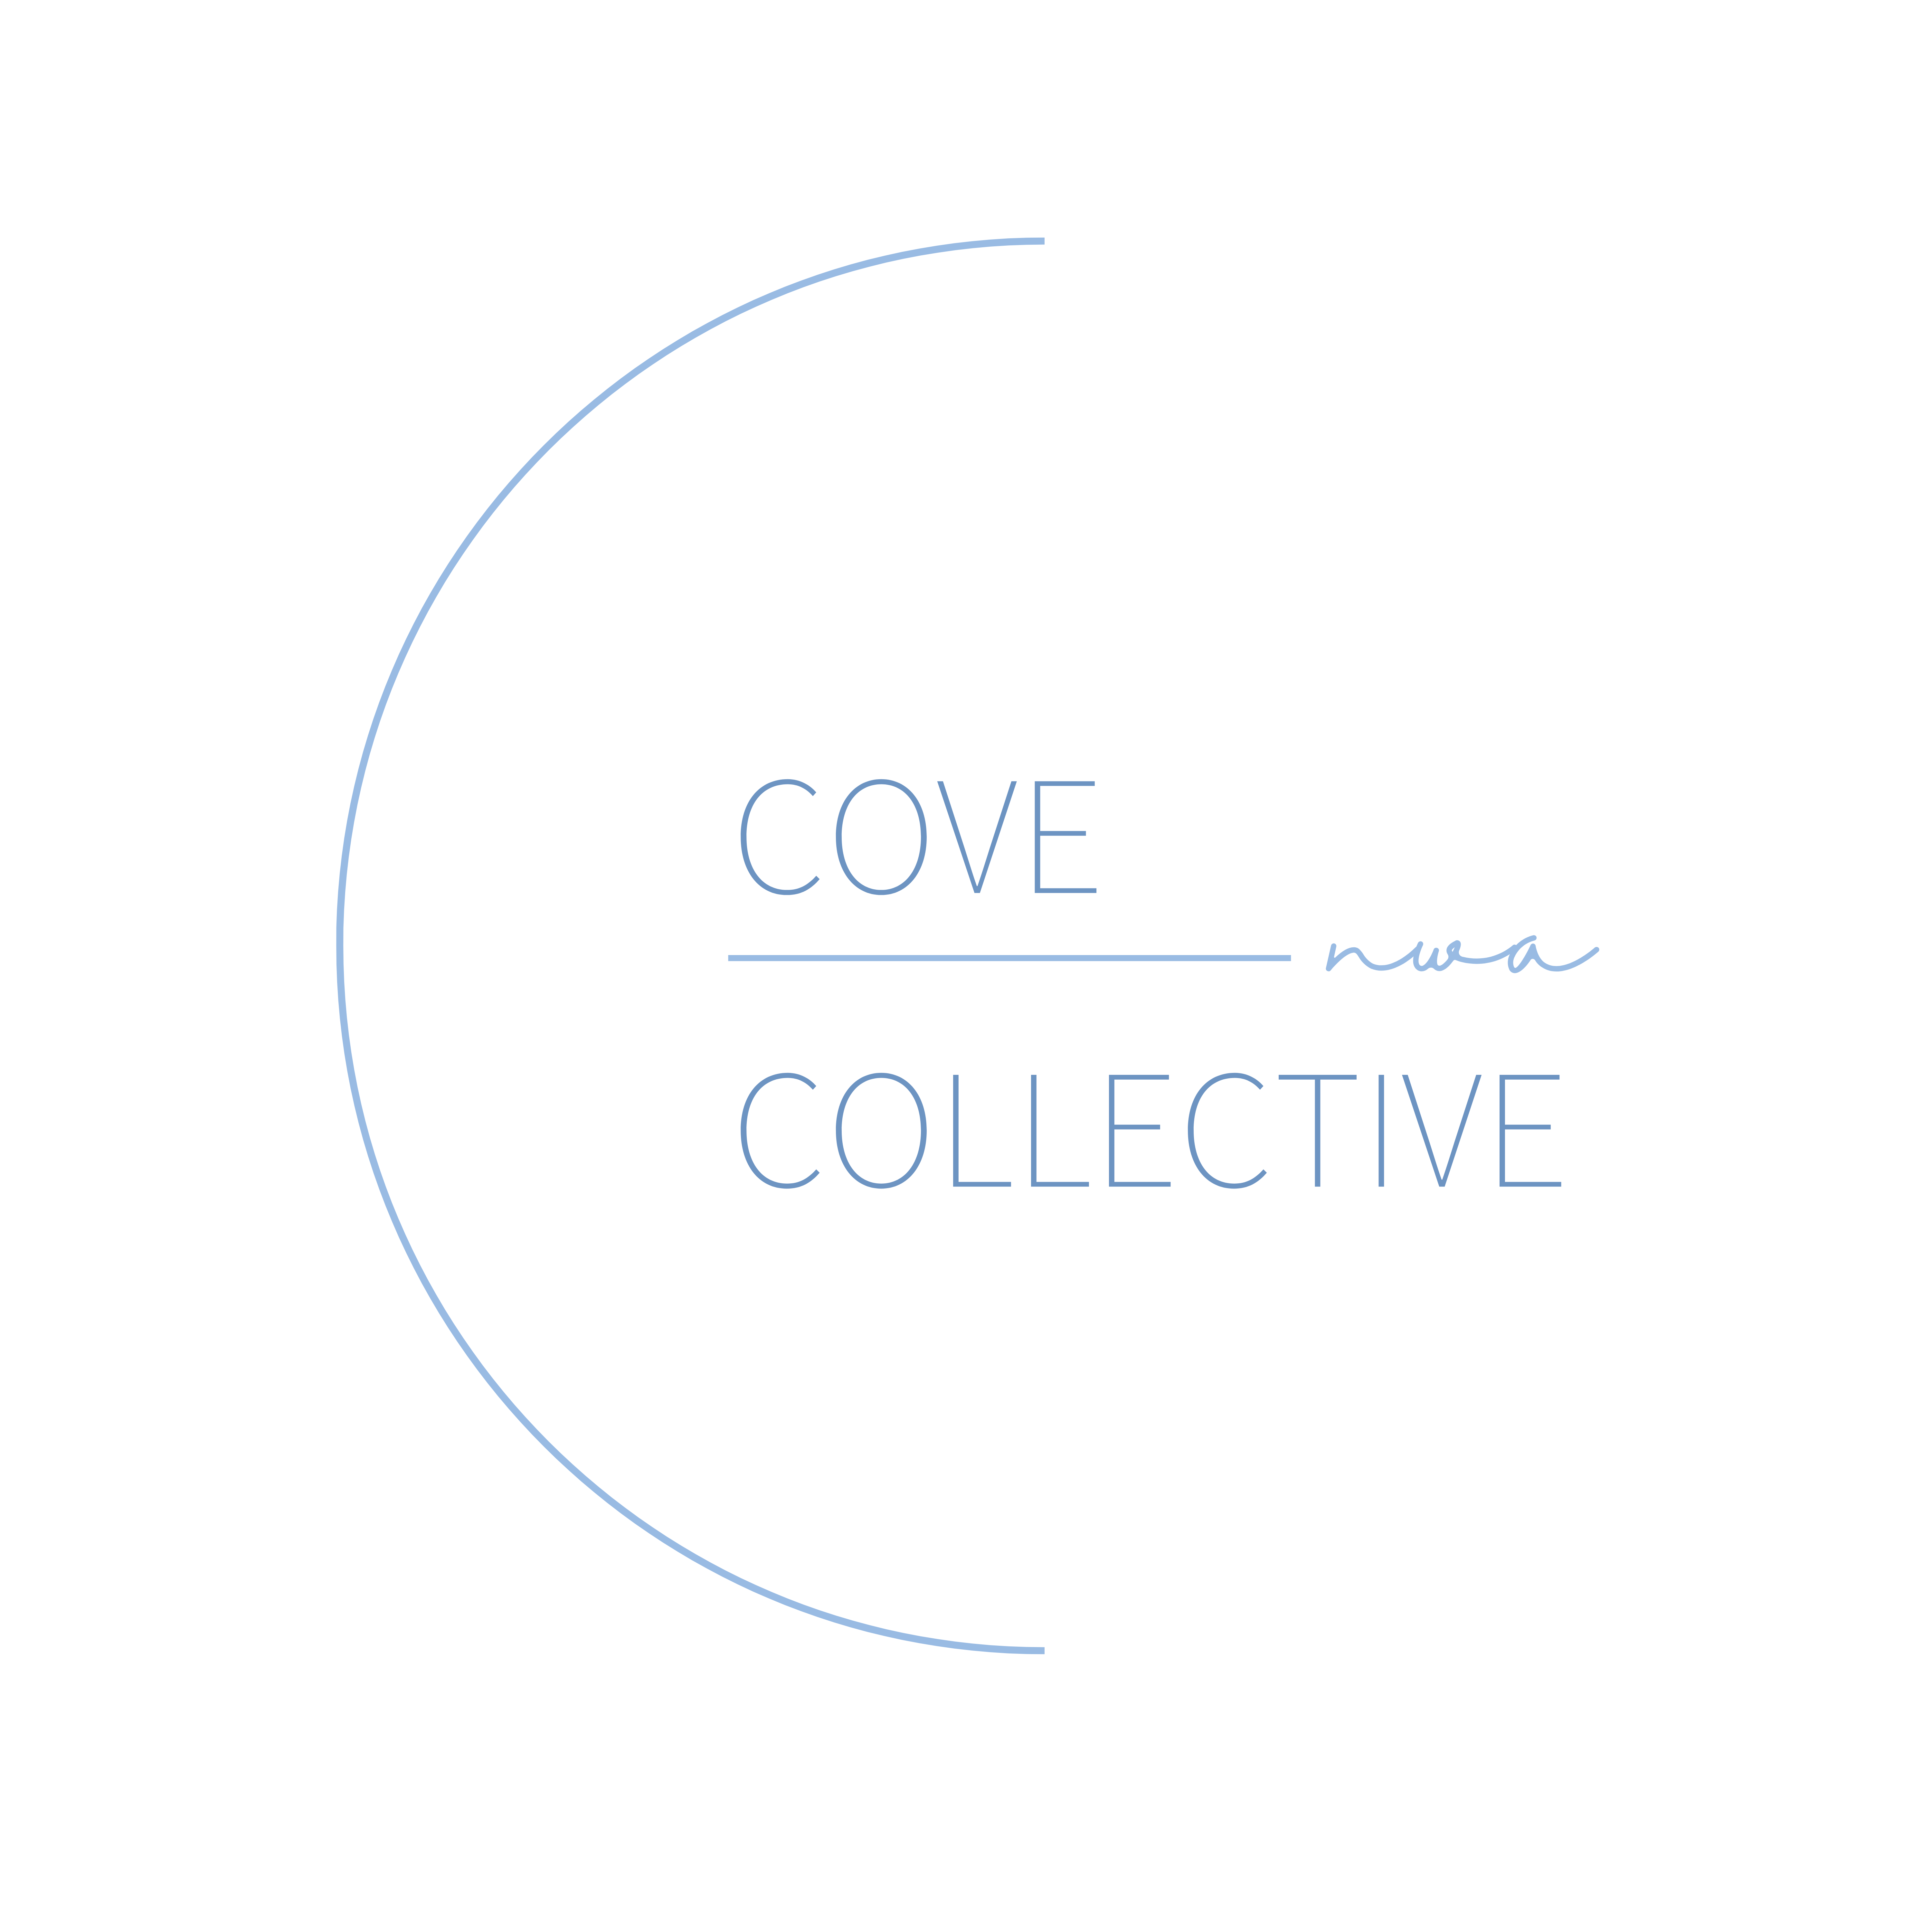 Cove Collective NWA (Opening Soon)